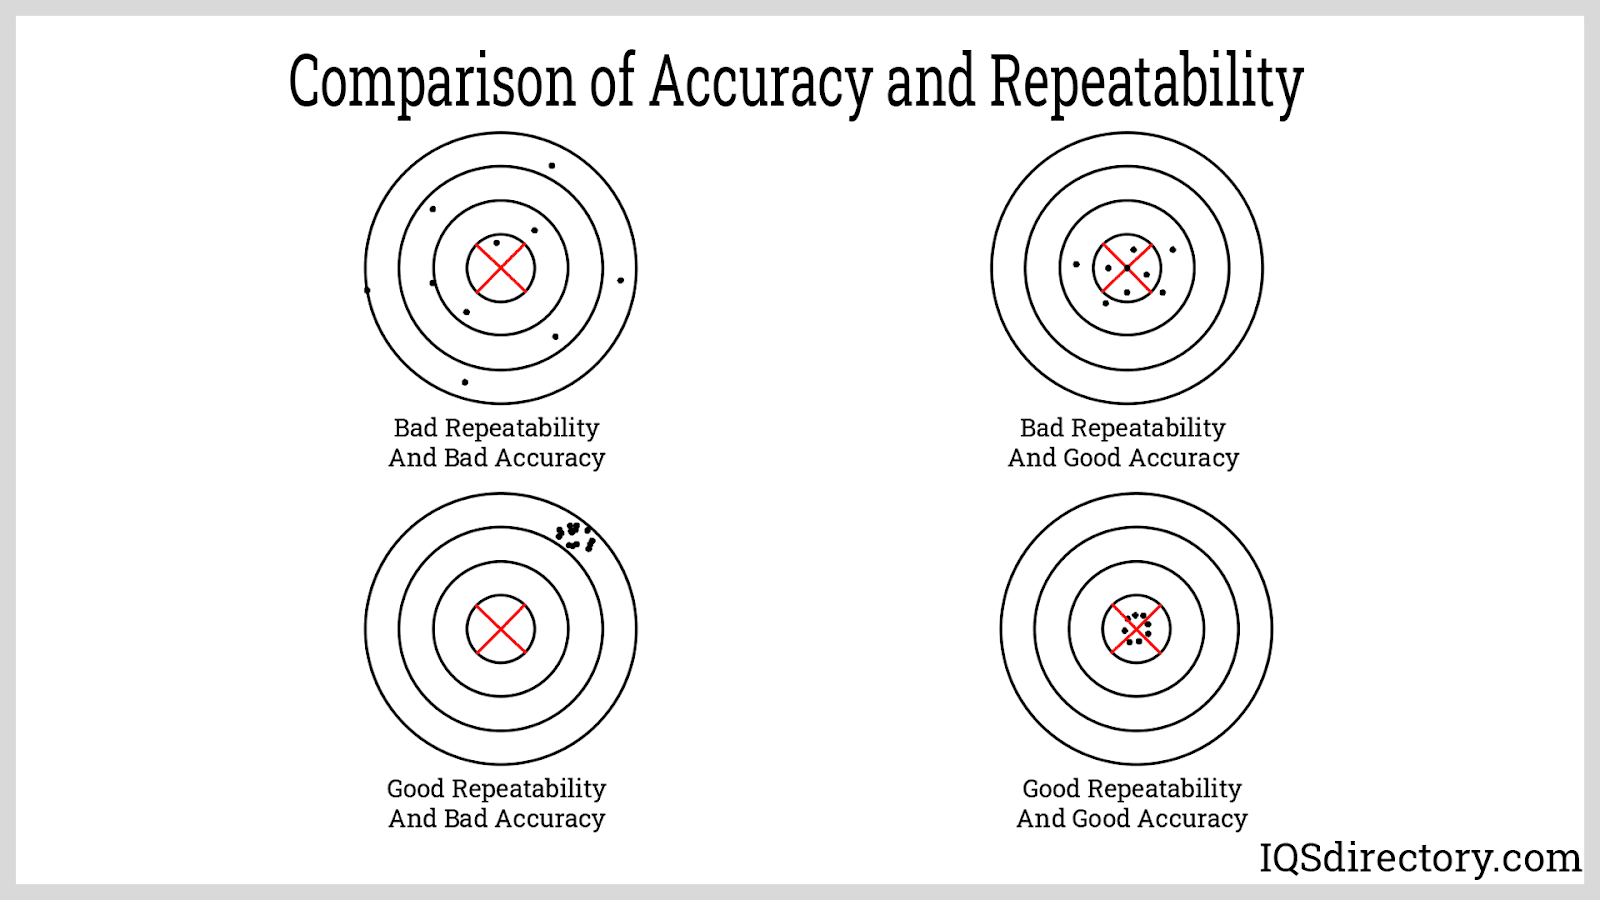 Comparison of Accuracy and Repeatability